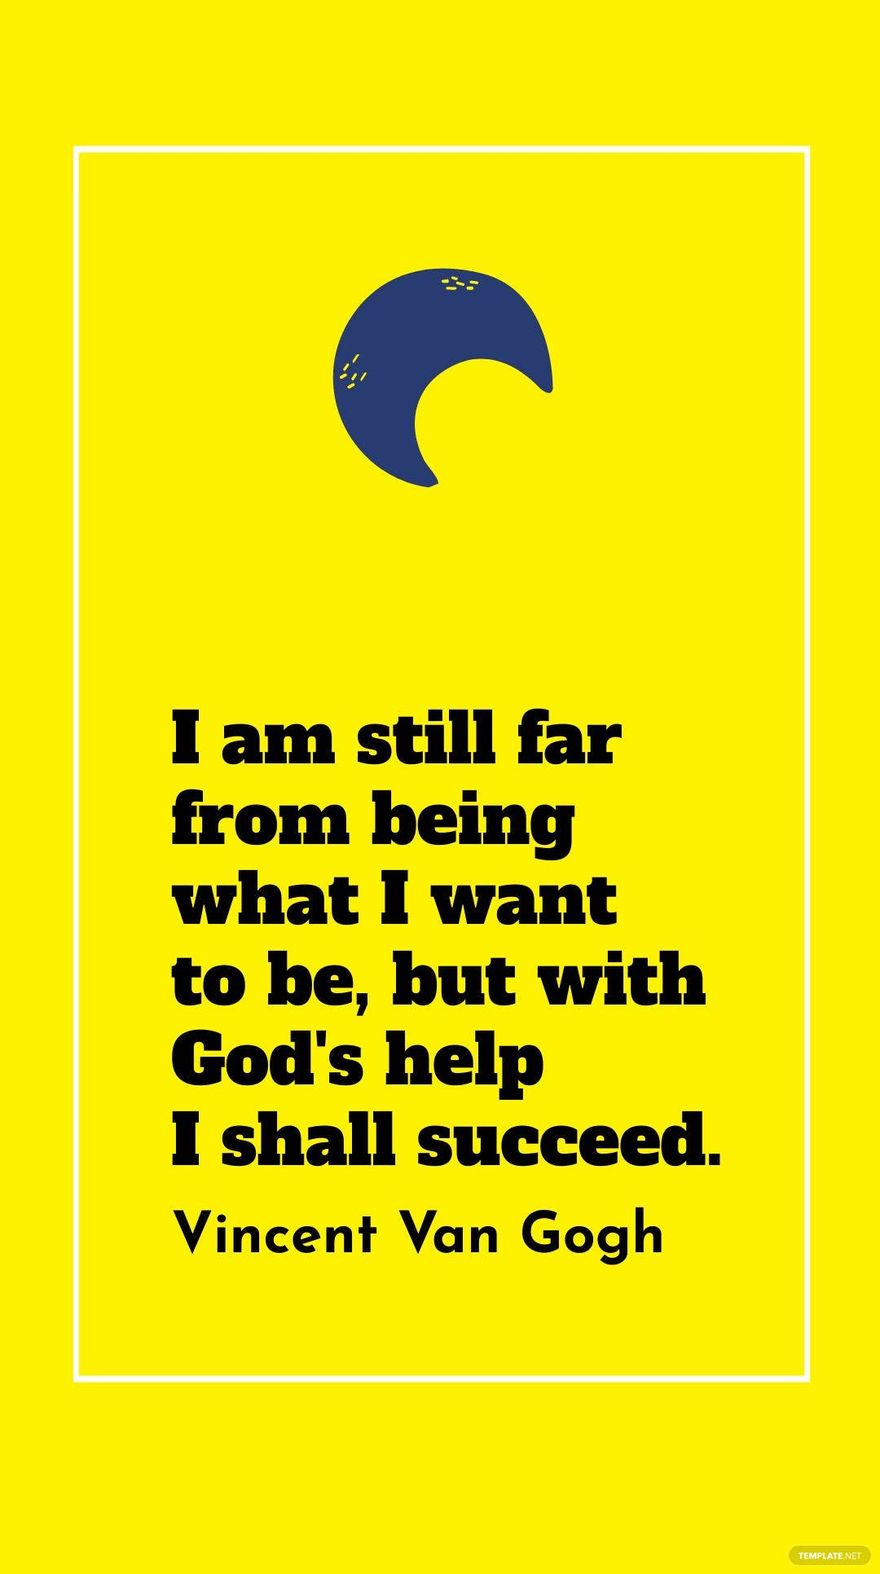 Free Vincent Van Gogh - I am still far from being what I want to be, but with God's help I shall succeed. in JPG